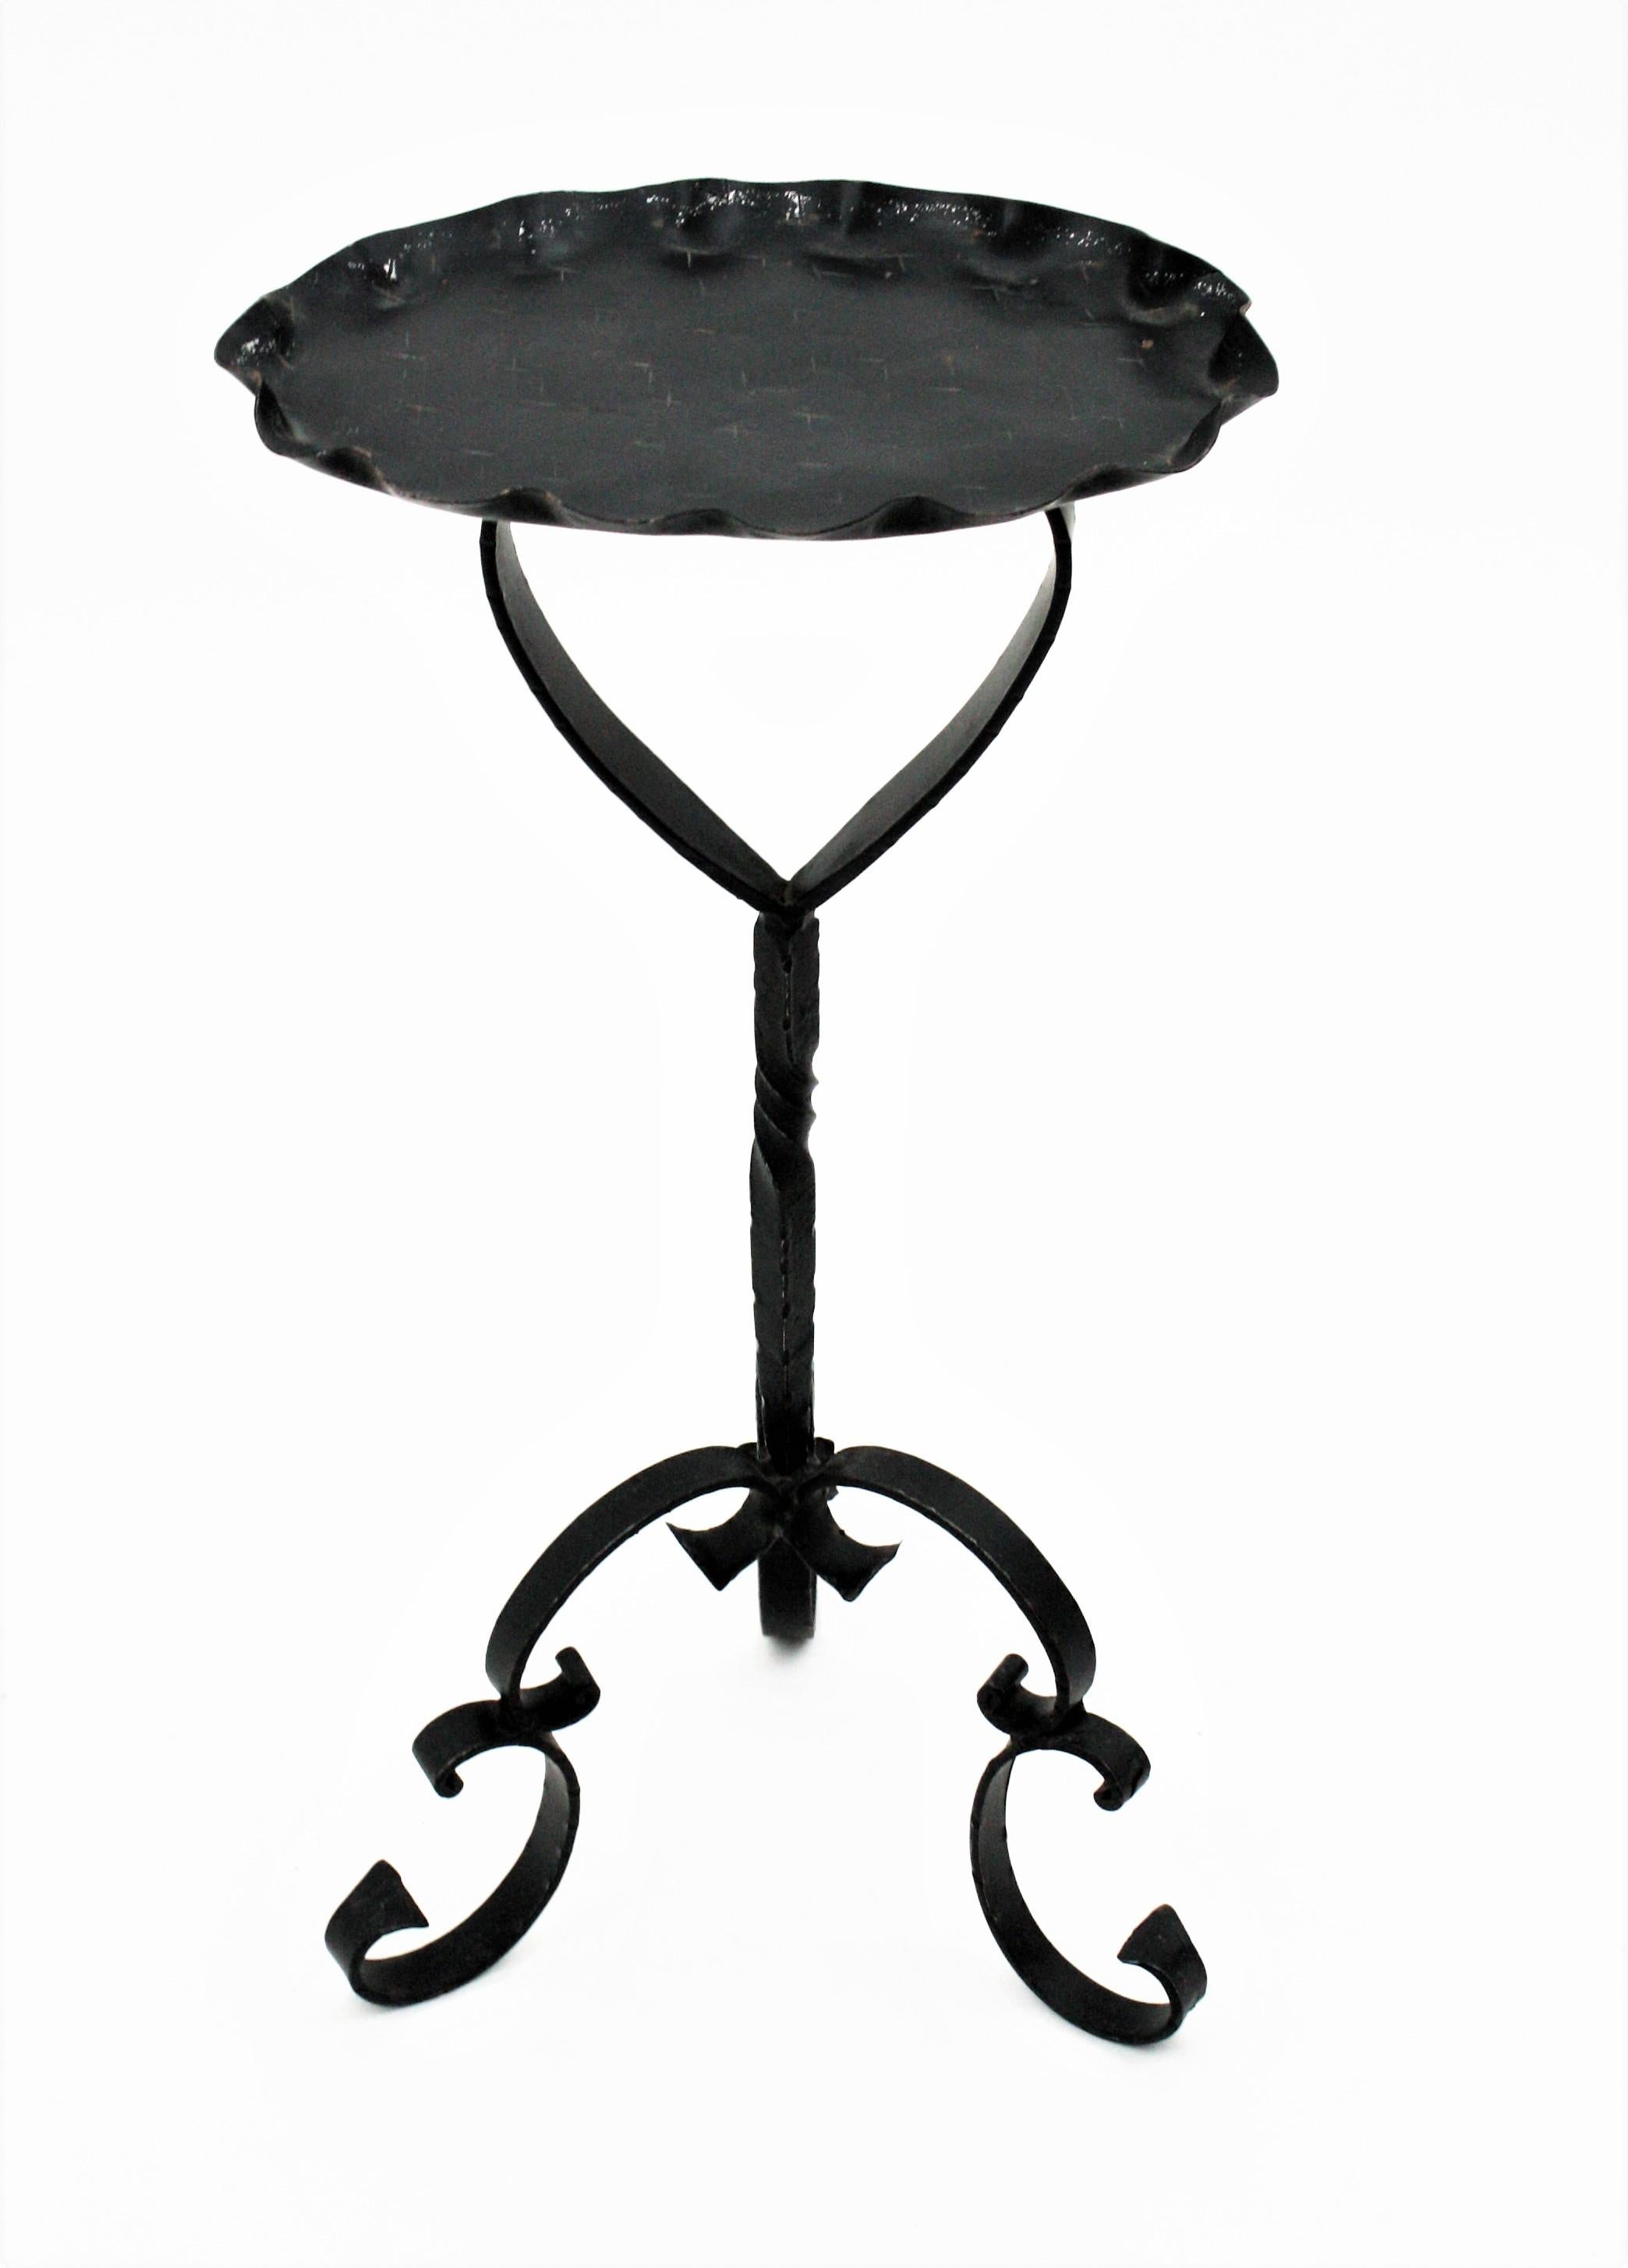 Spanish Drinks Table / Side Table / Oval Martini Table in Wrought Iron 7